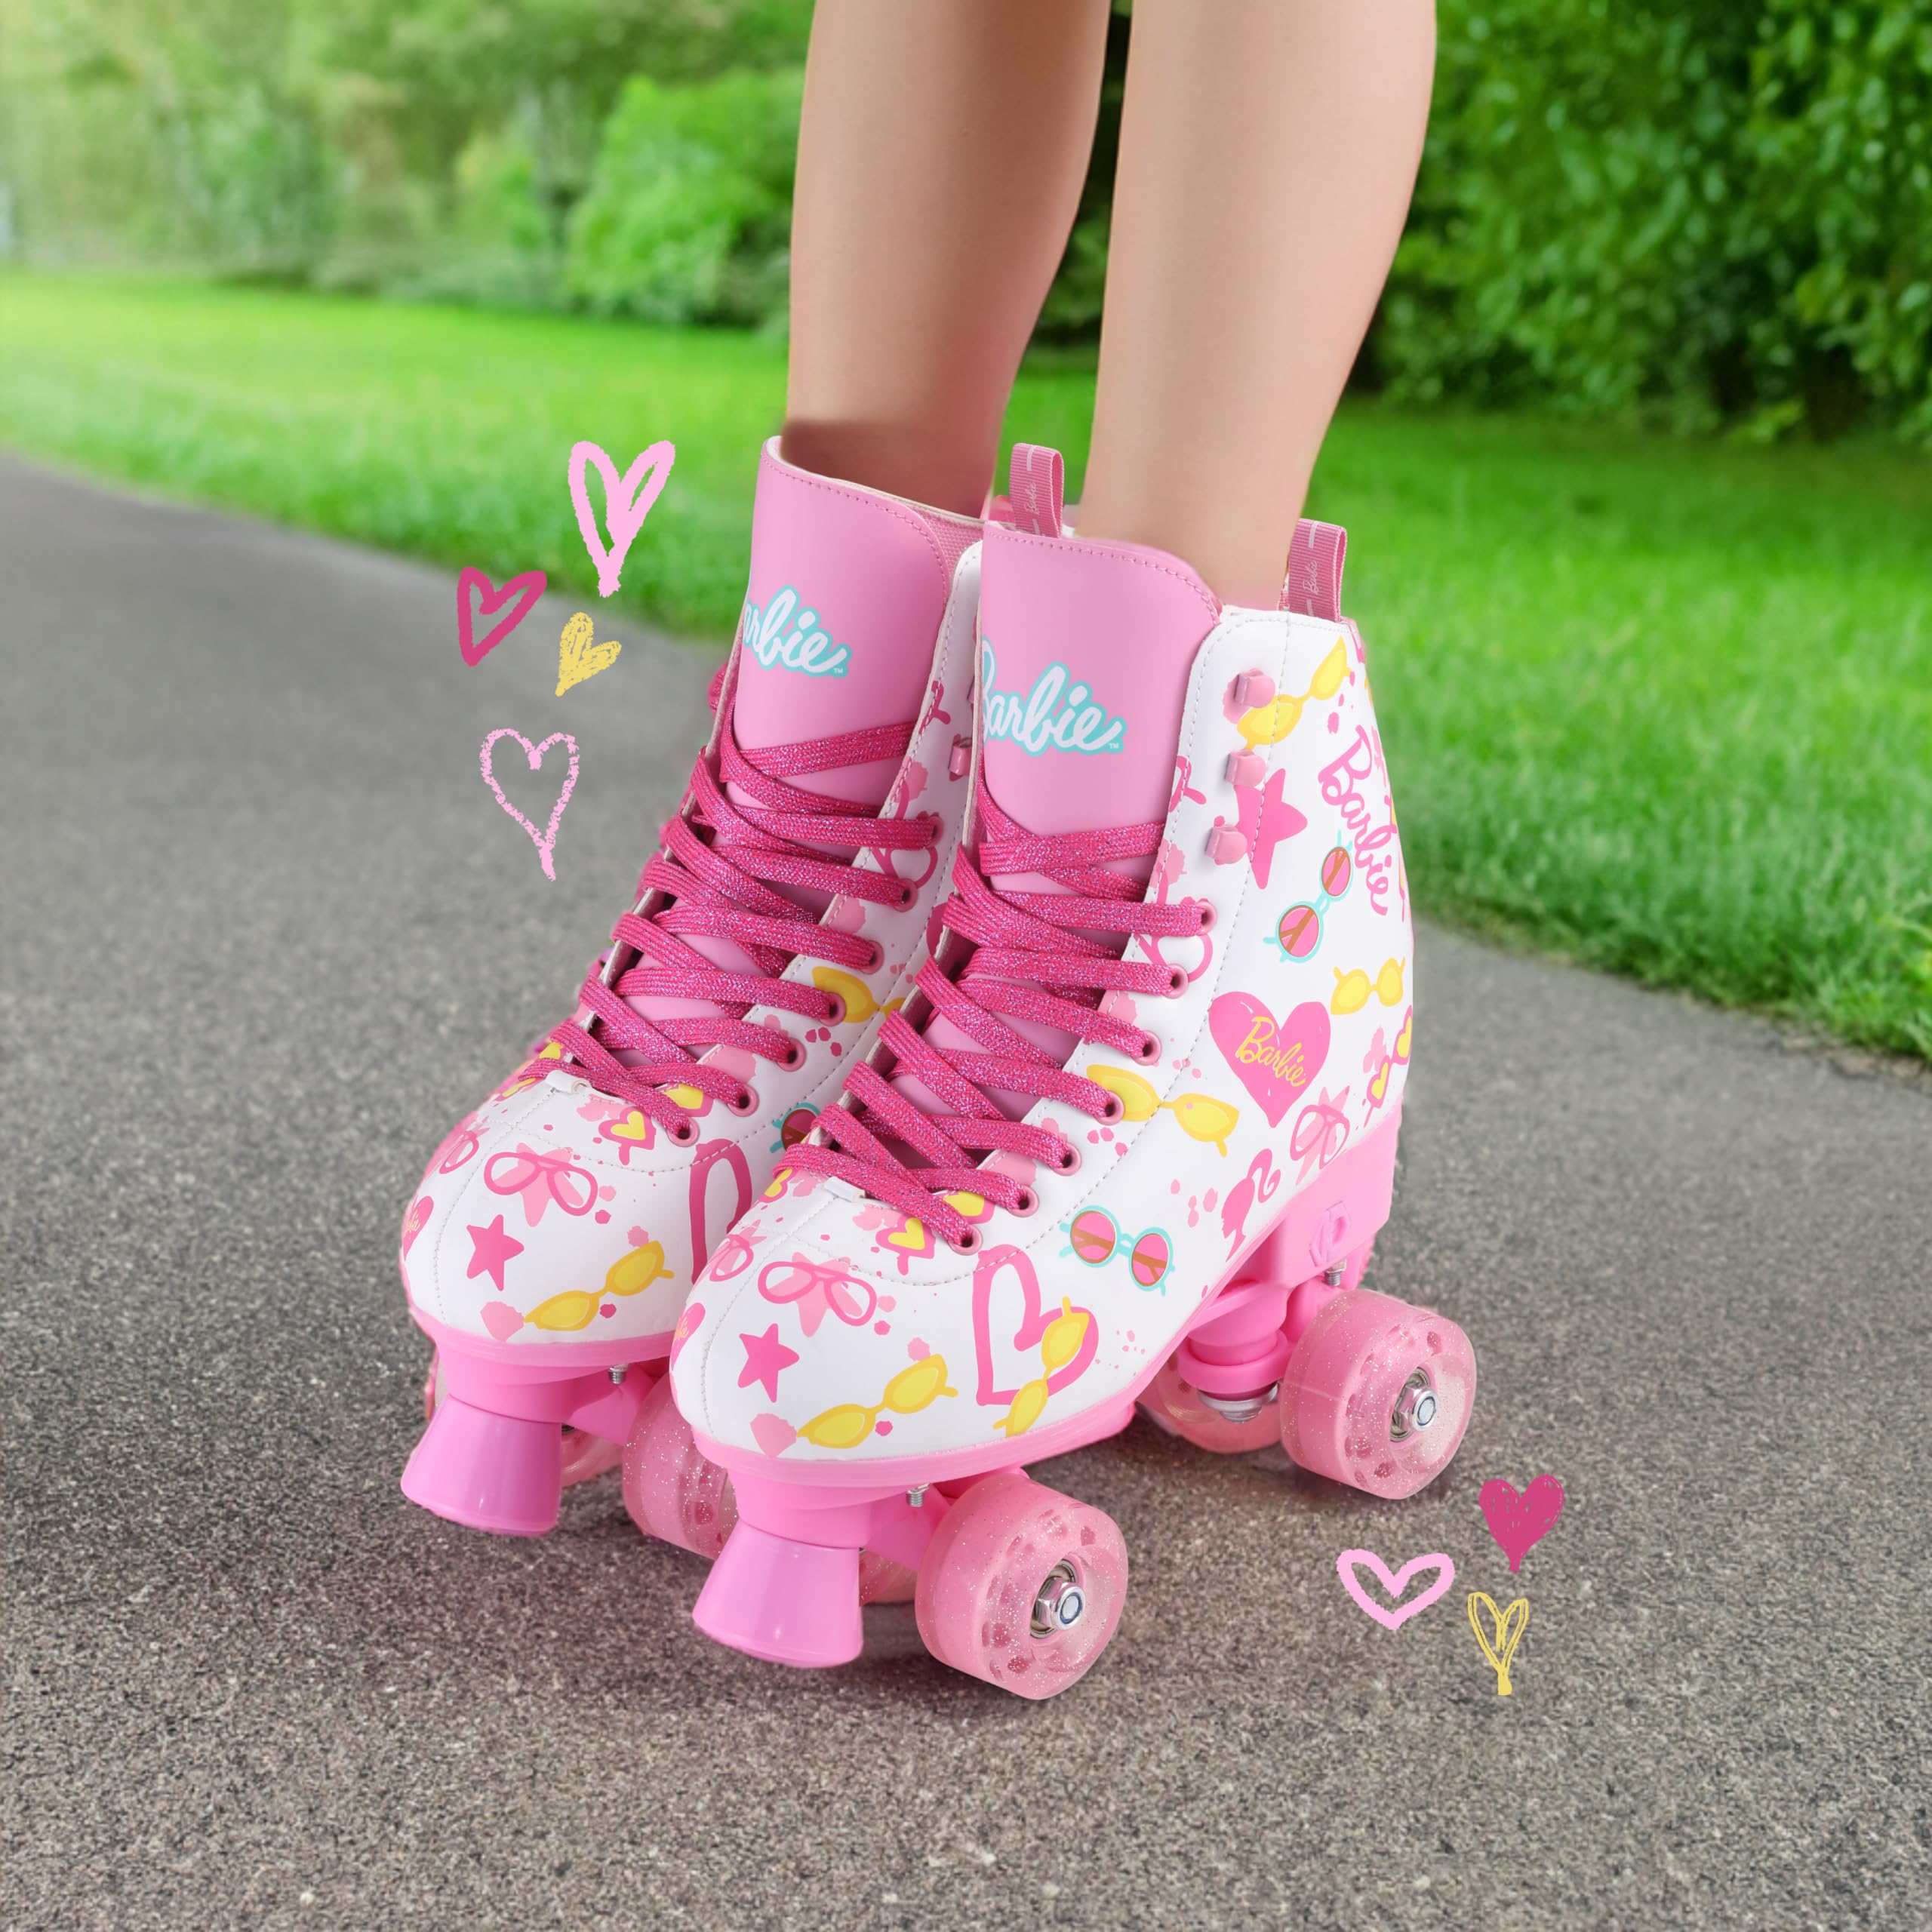 BARBIE Roller Skates for Girls - Adjustable Sizes 12-2, Glitter Wheels, ABEC 5 Bearings - Durable PVC Material, Foam Shoe Lining - Perfect for Active Fun and Adventures, Size 12-2